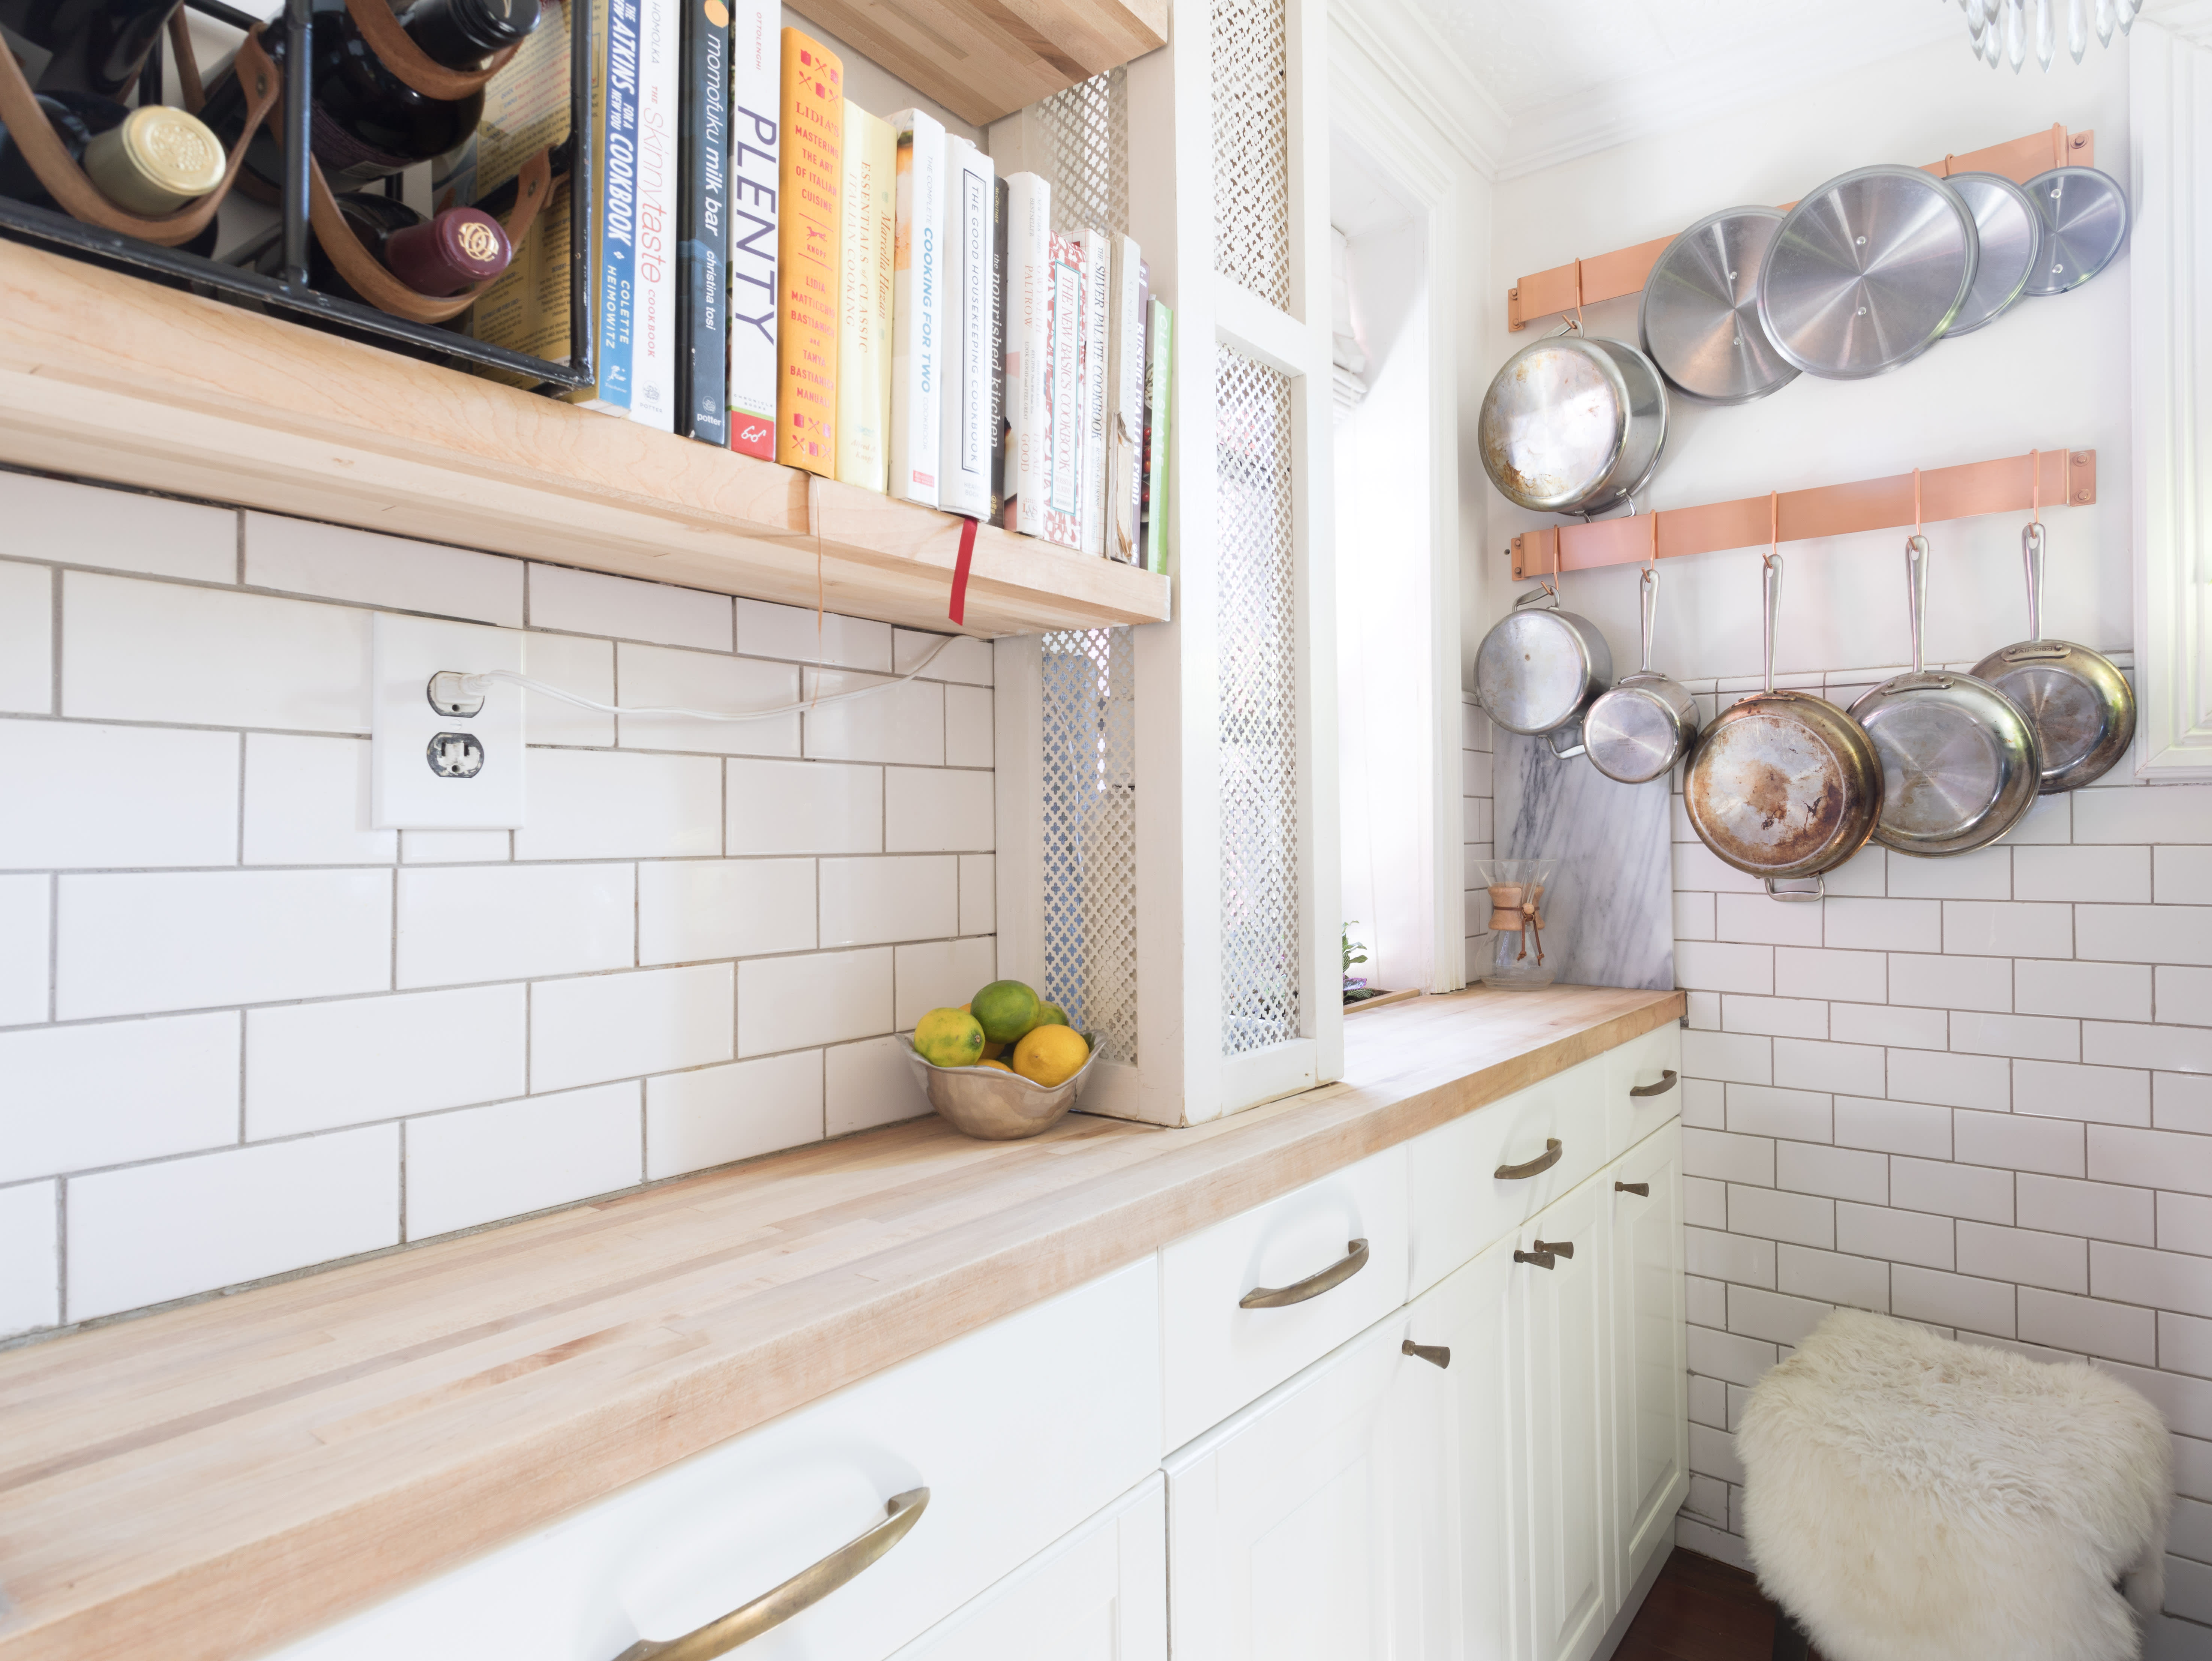 How to Design a 49-Square-Foot Tiny Kitchen With Tons of Smart Storage